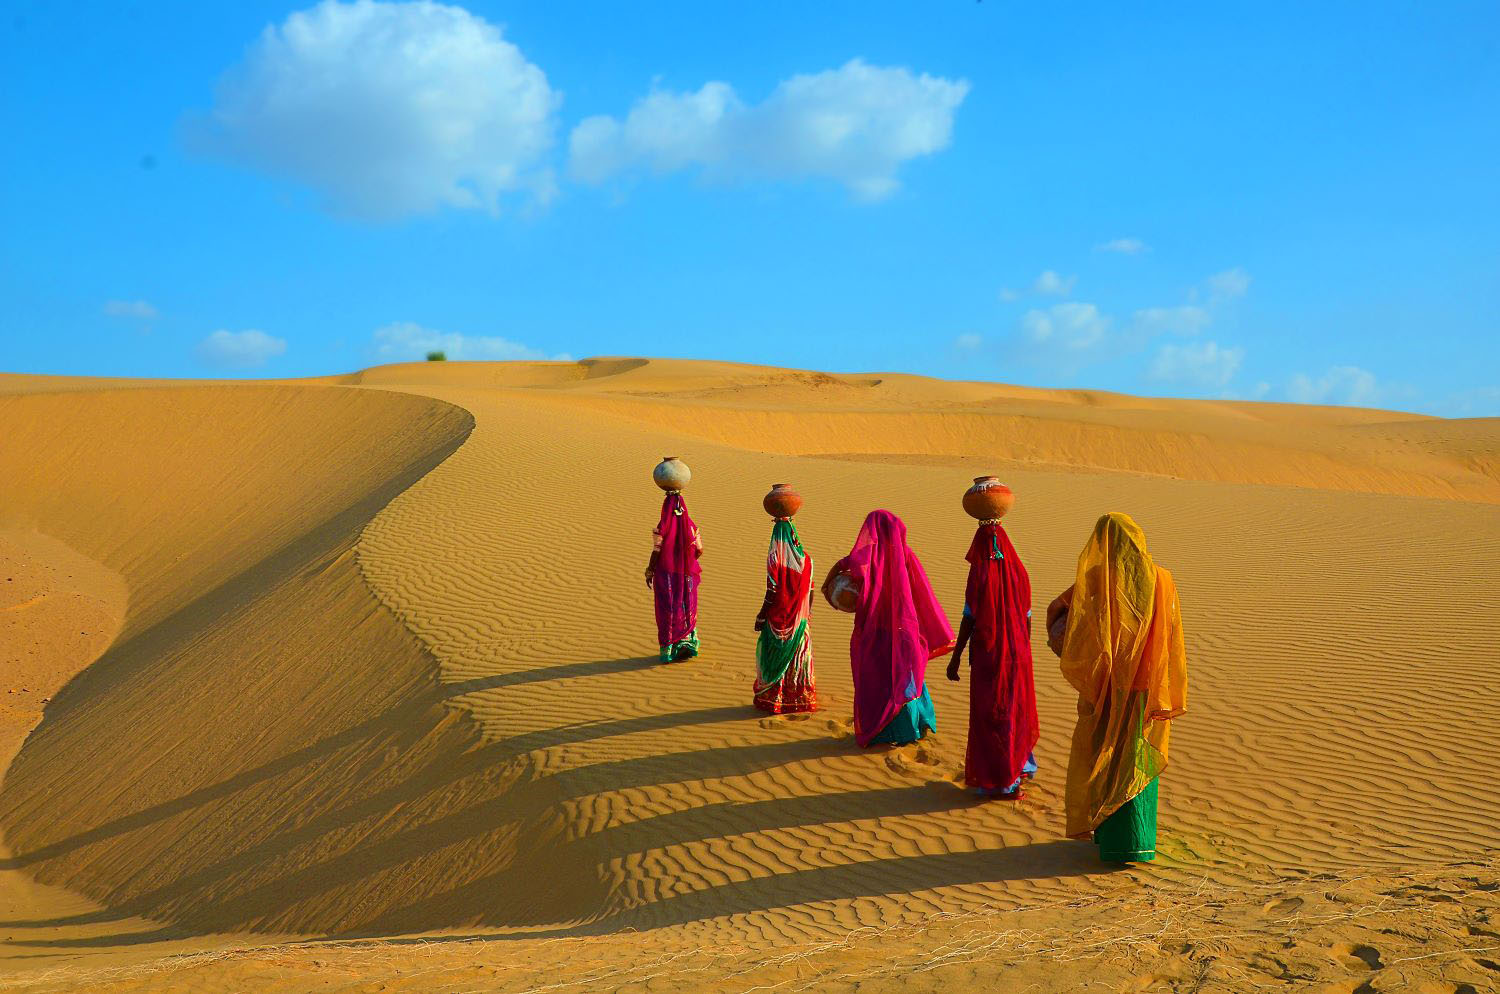 ndian women carrying heavy jugs of water on their head and walking on a yellow sand dune in the hot summer desert against blue sky